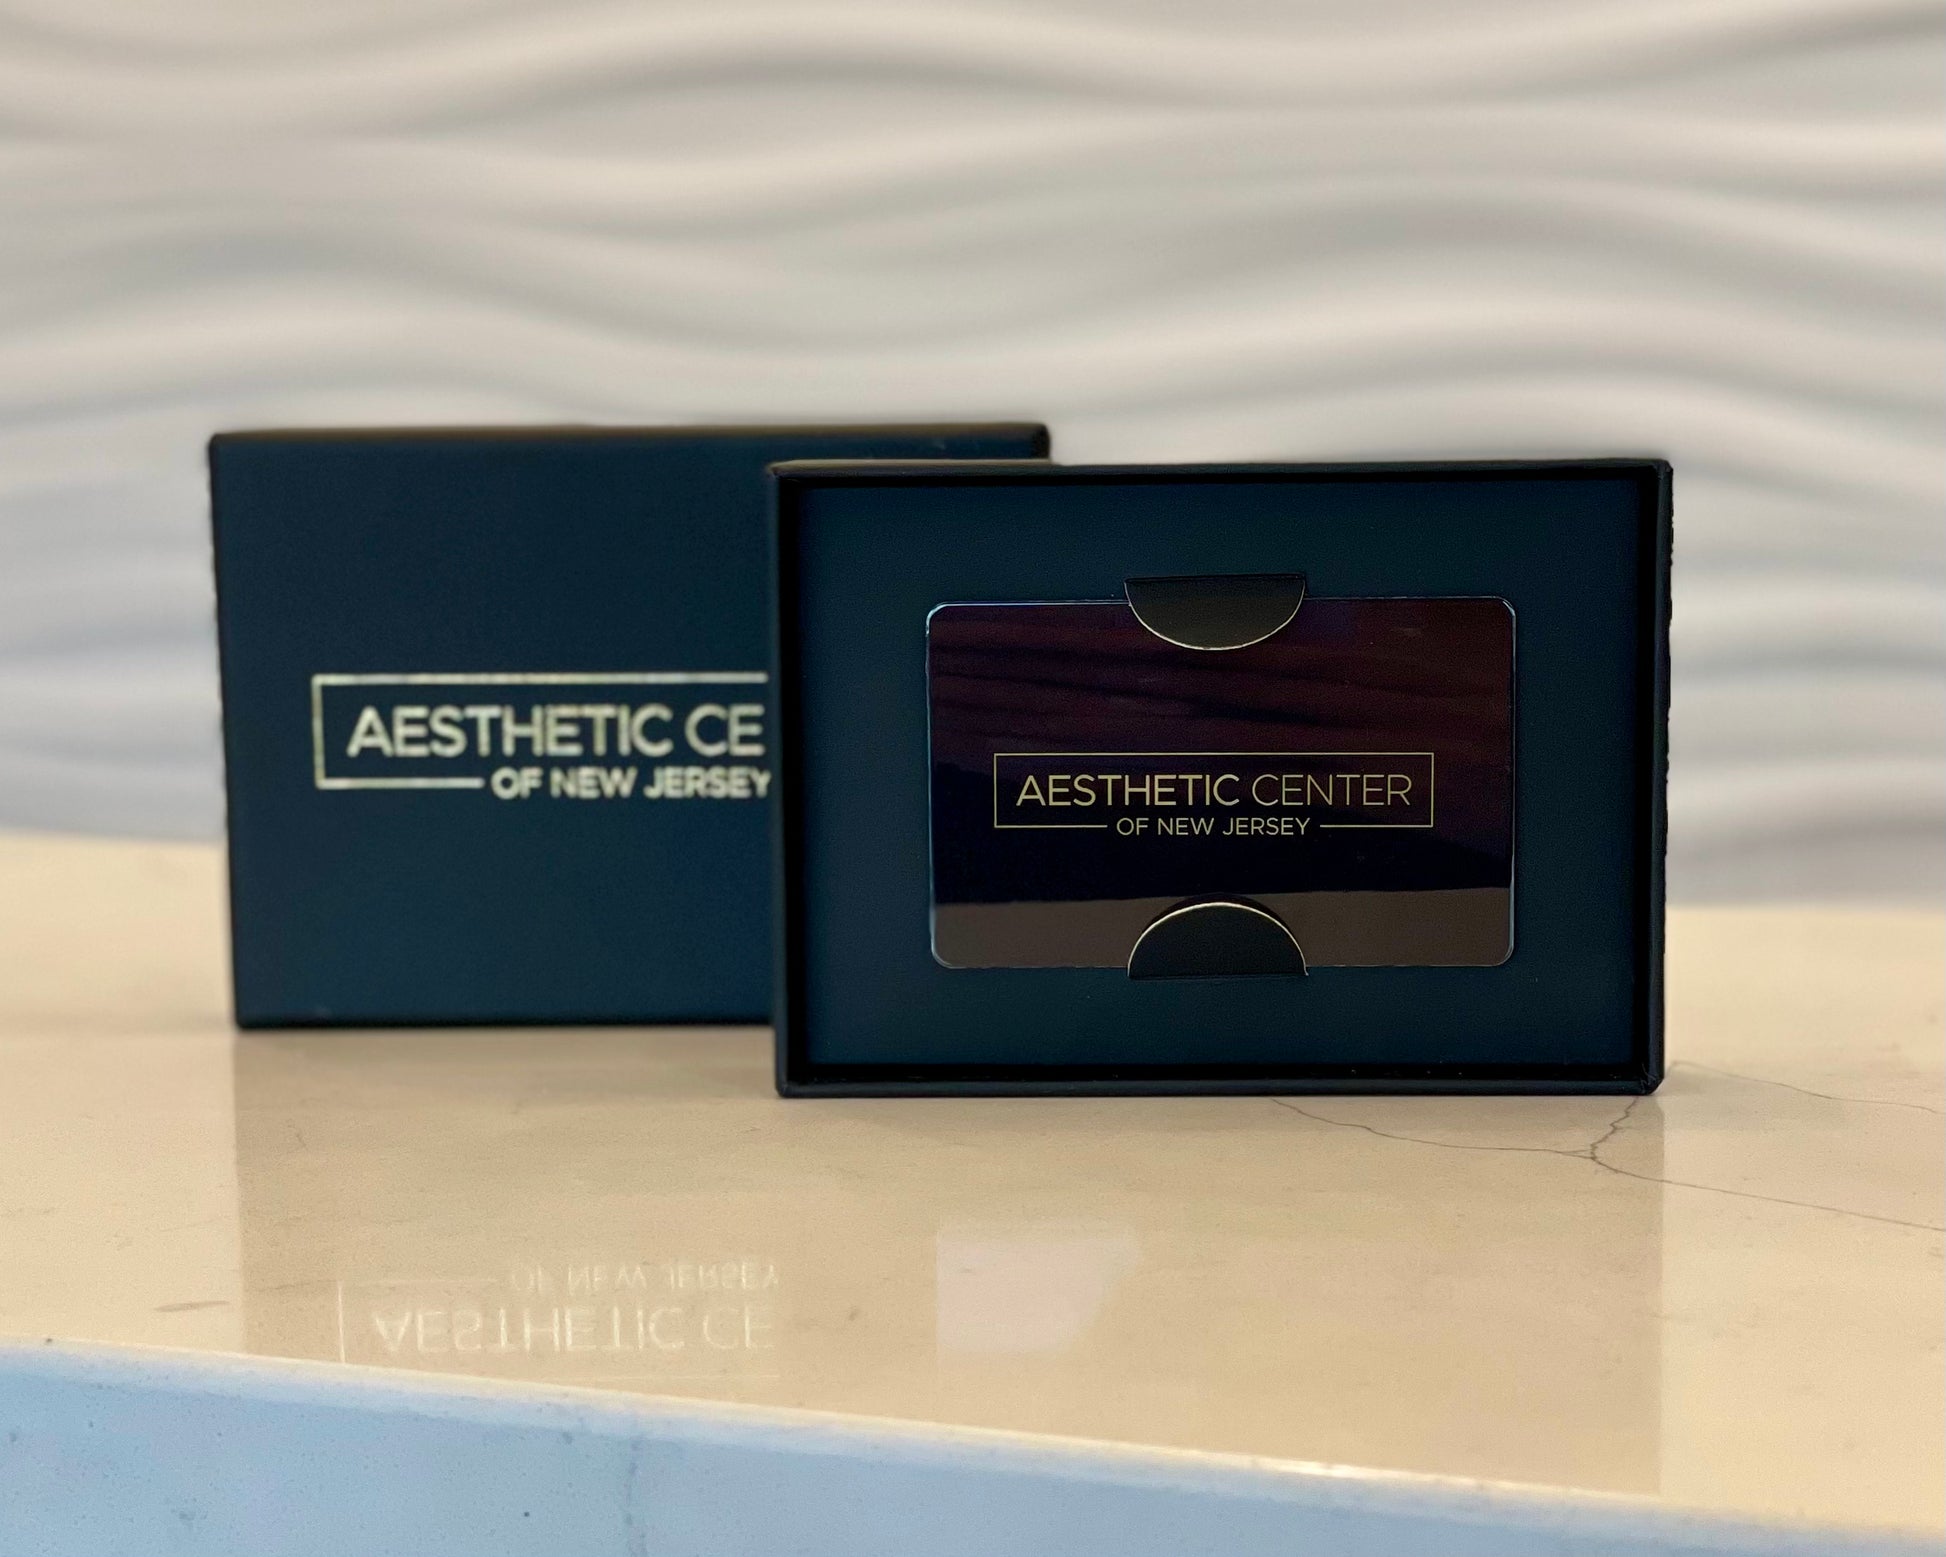 Aesthetic Center of New Jersey gift card in an open gift box.